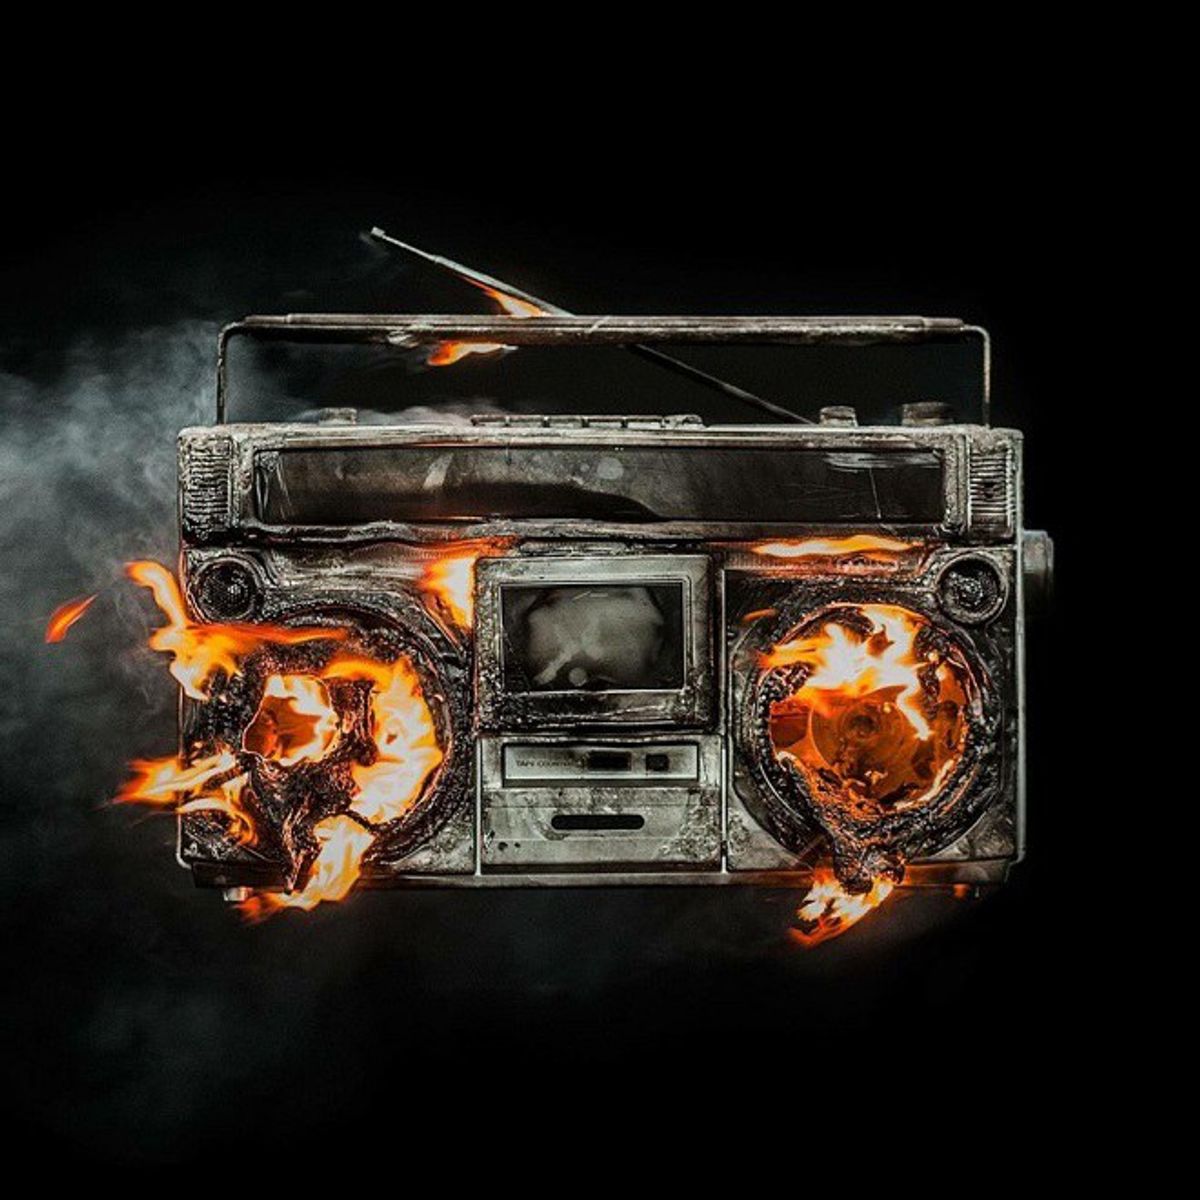 Track-By-Track Review Of Green Day's Revoltuion Radio